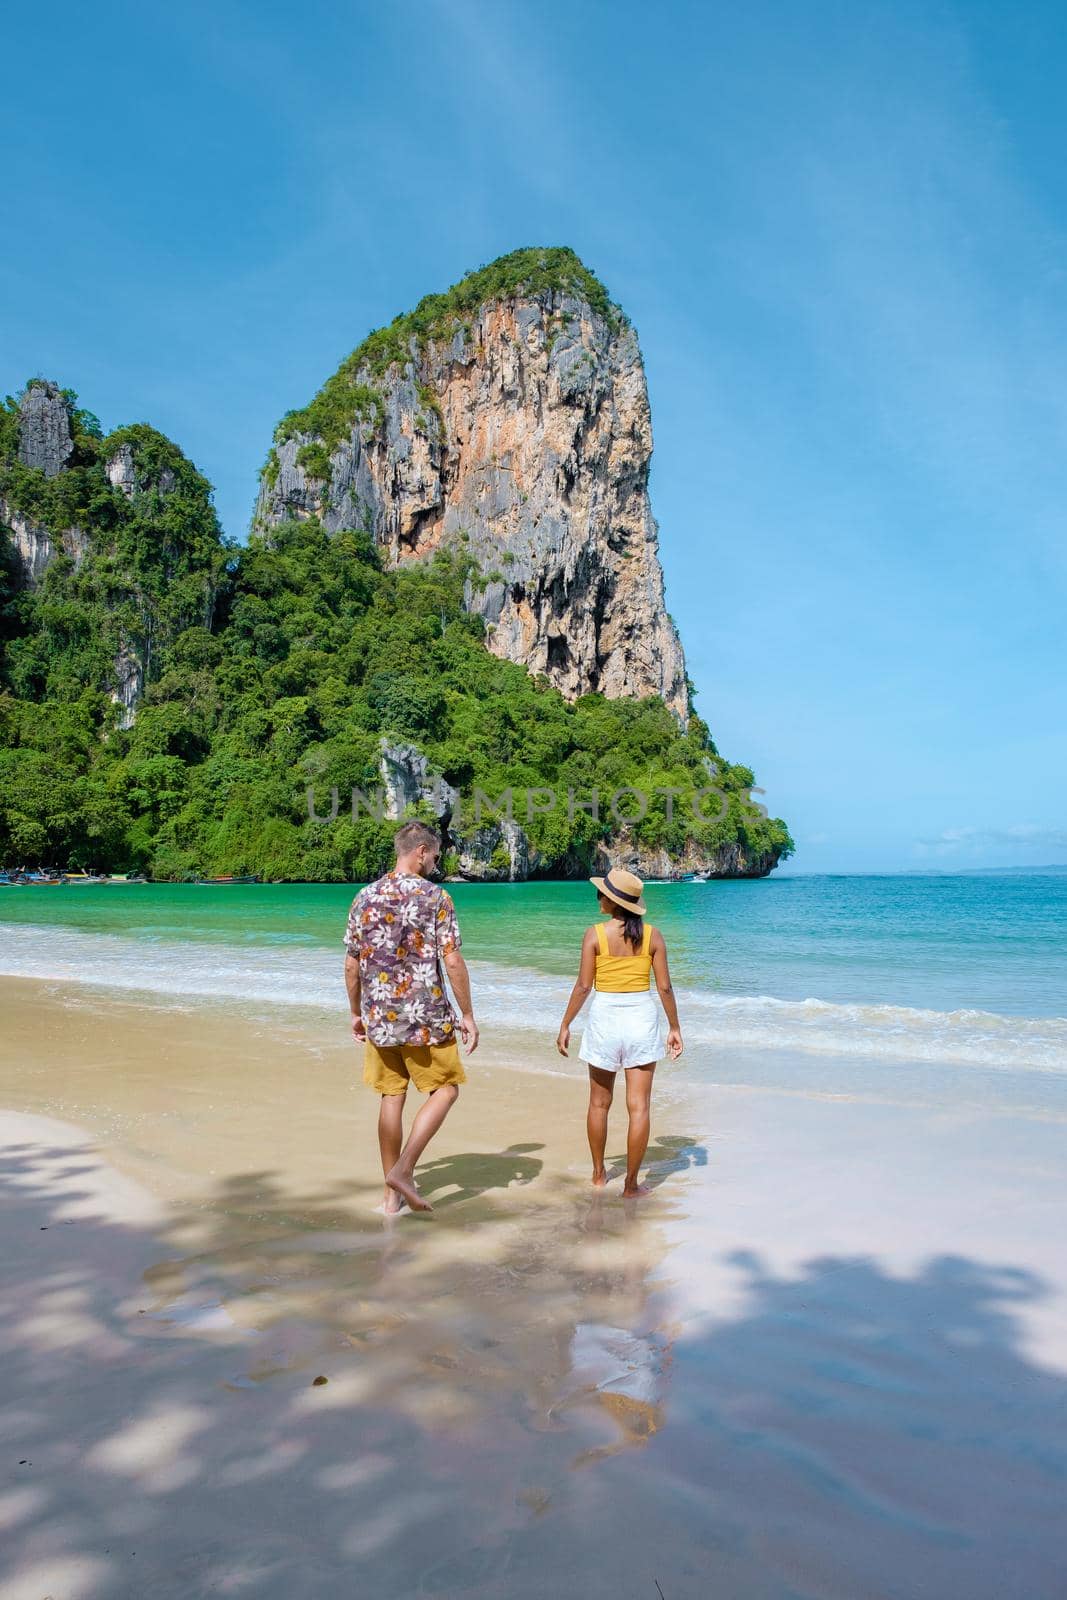 Railay Beach Krabi Thailand, the tropical beach of Railay Krabi, a couple of men and woman on the beach, Panoramic view of idyllic Railay Beach in Thailand with a traditional long boat.